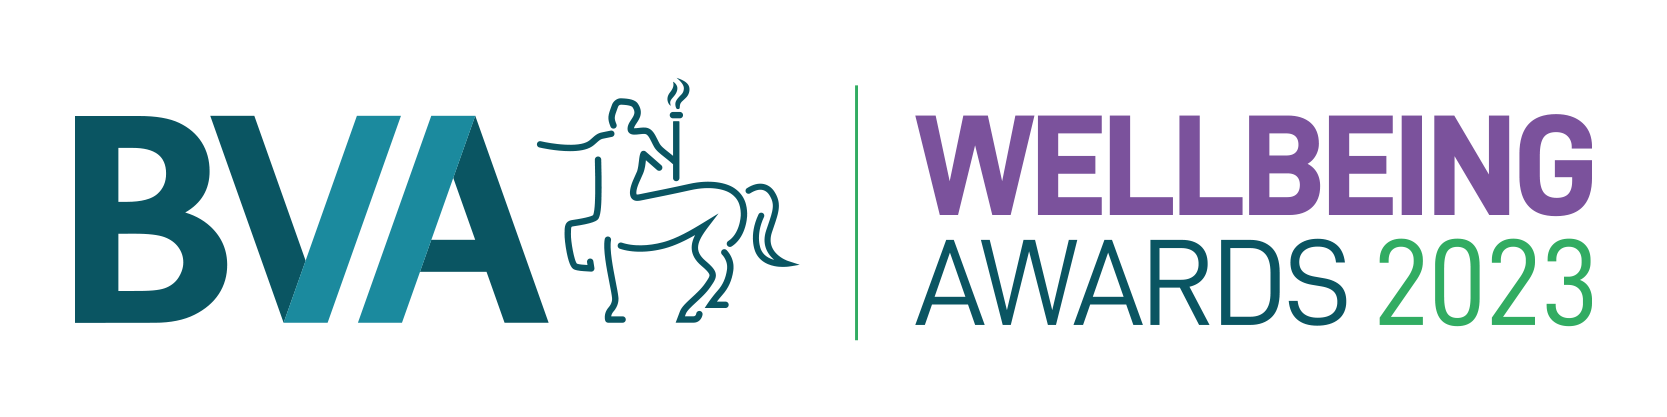 BVA unveils judges and sponsor for new awards celebrating wellbeing in the workplace Image